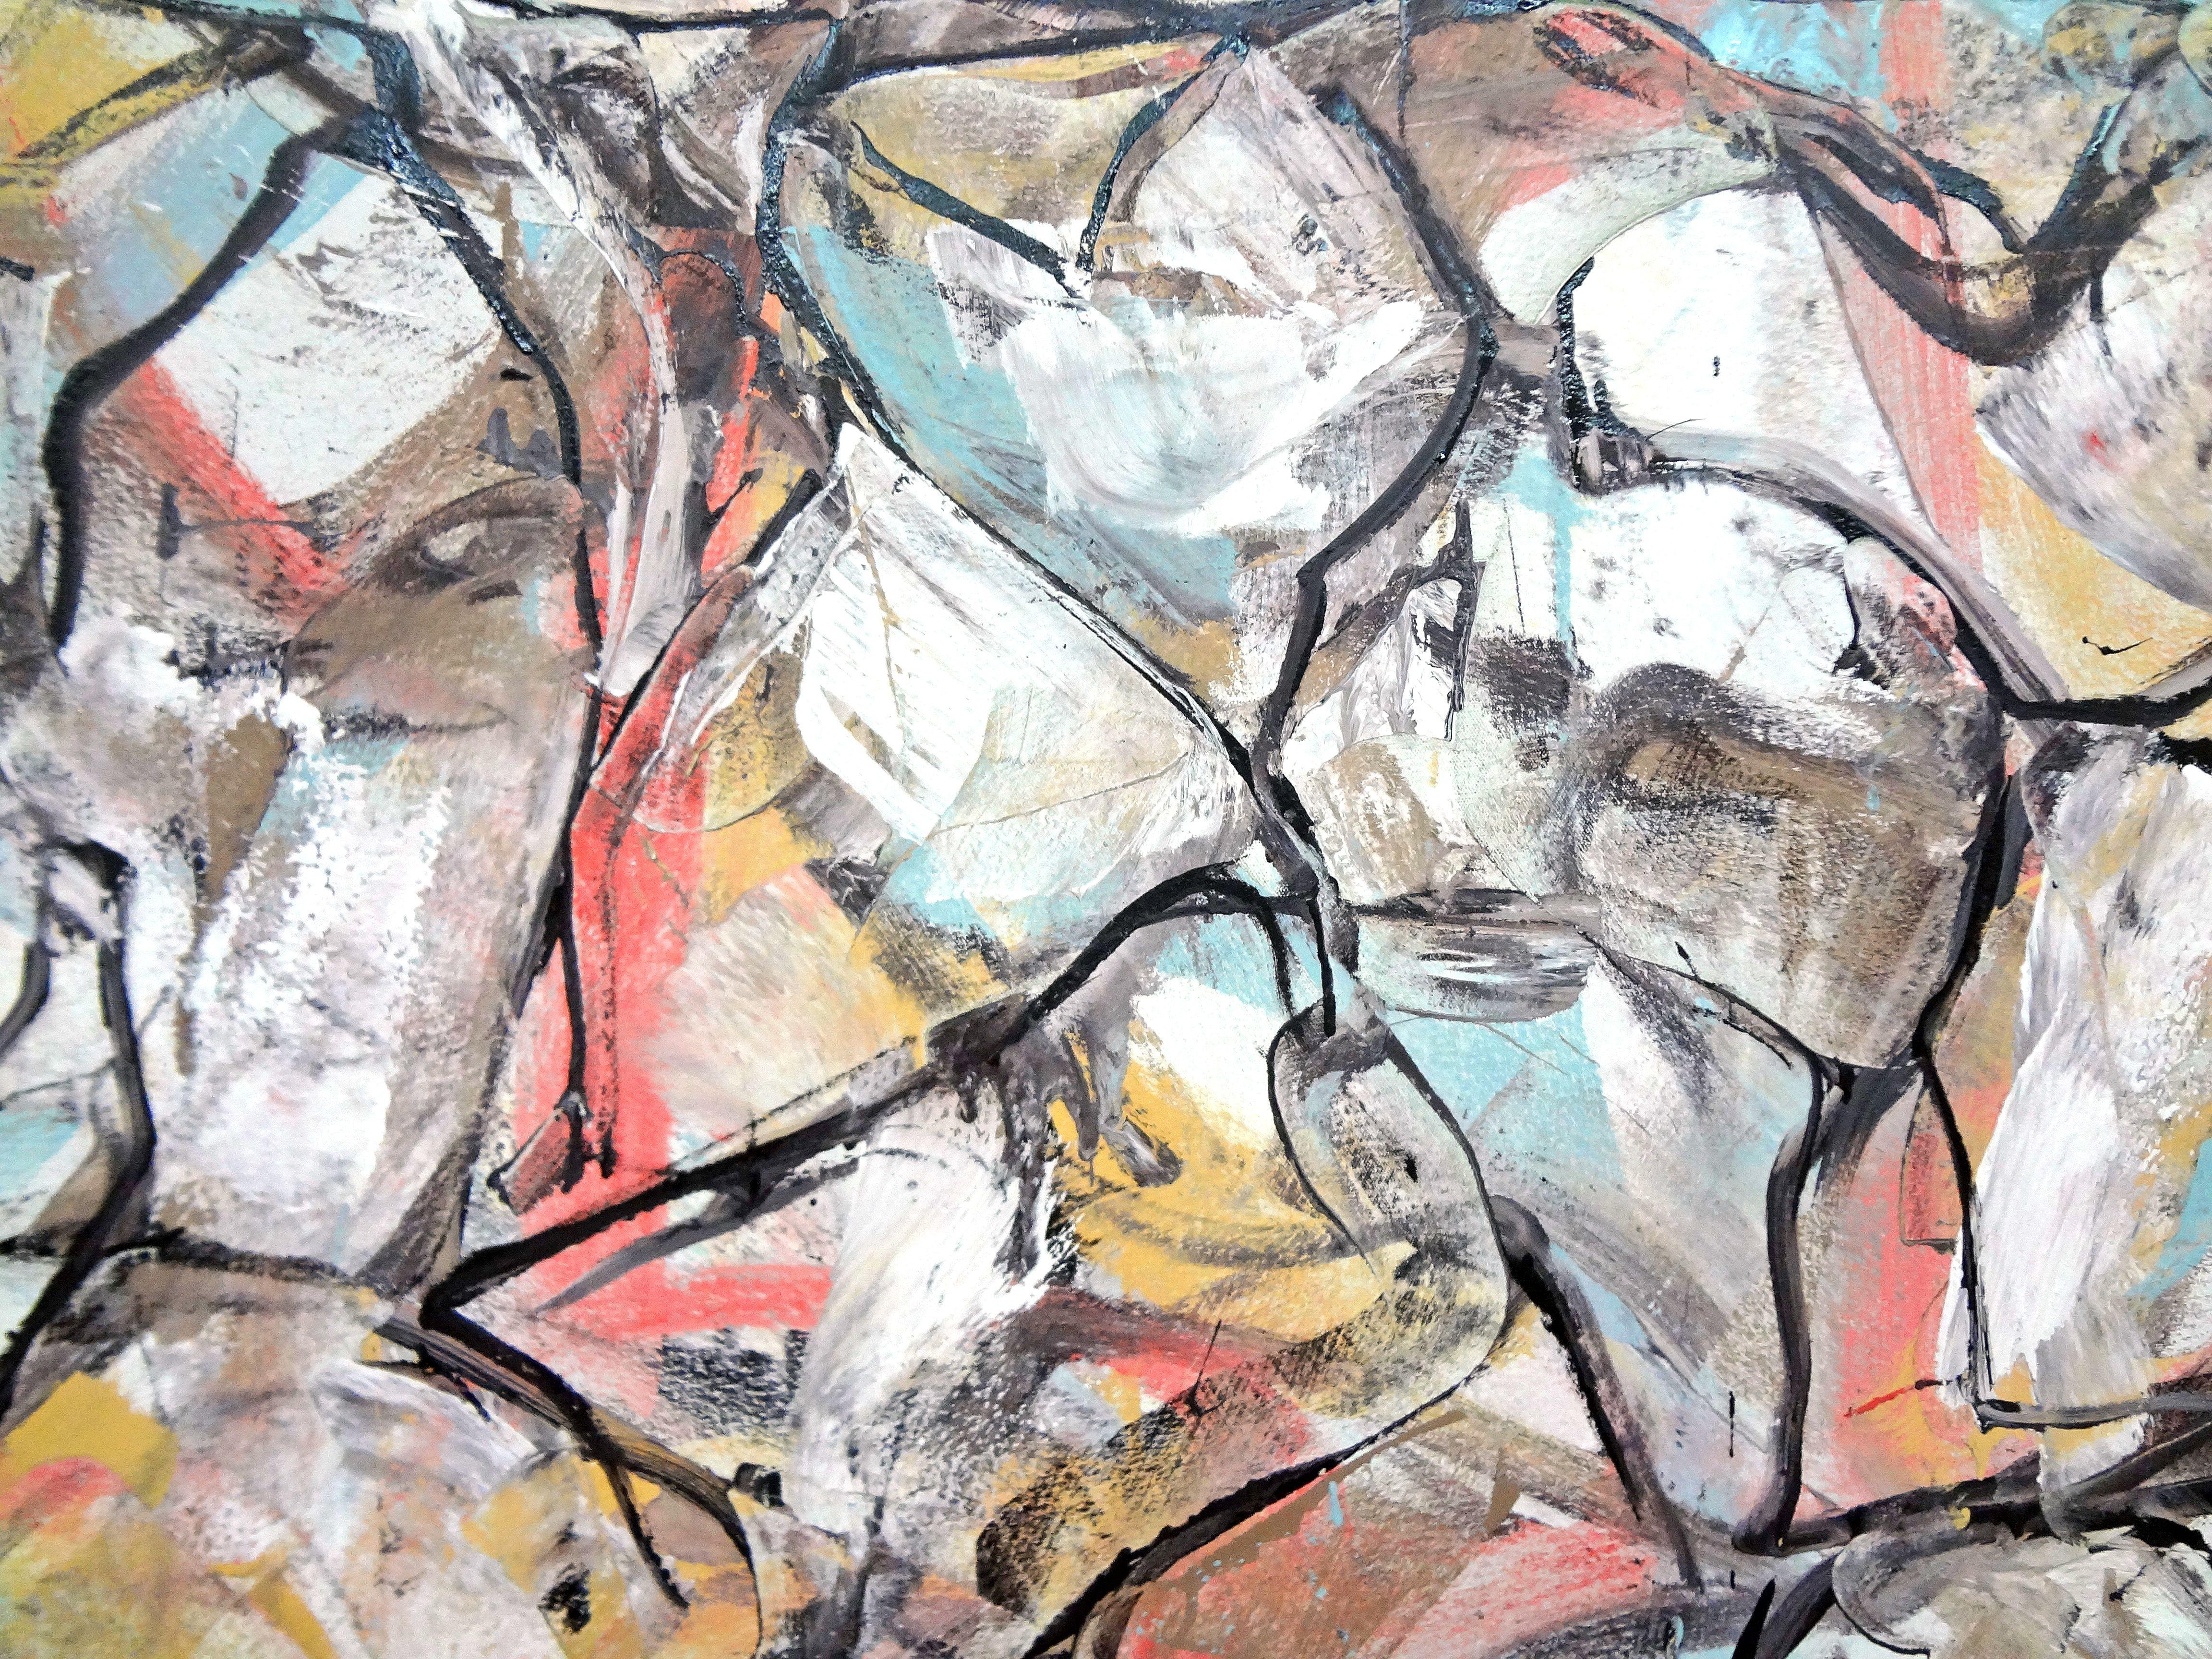 Street Chain, Painting, Oil on Canvas - Gray Abstract Painting by Matthew Dibble